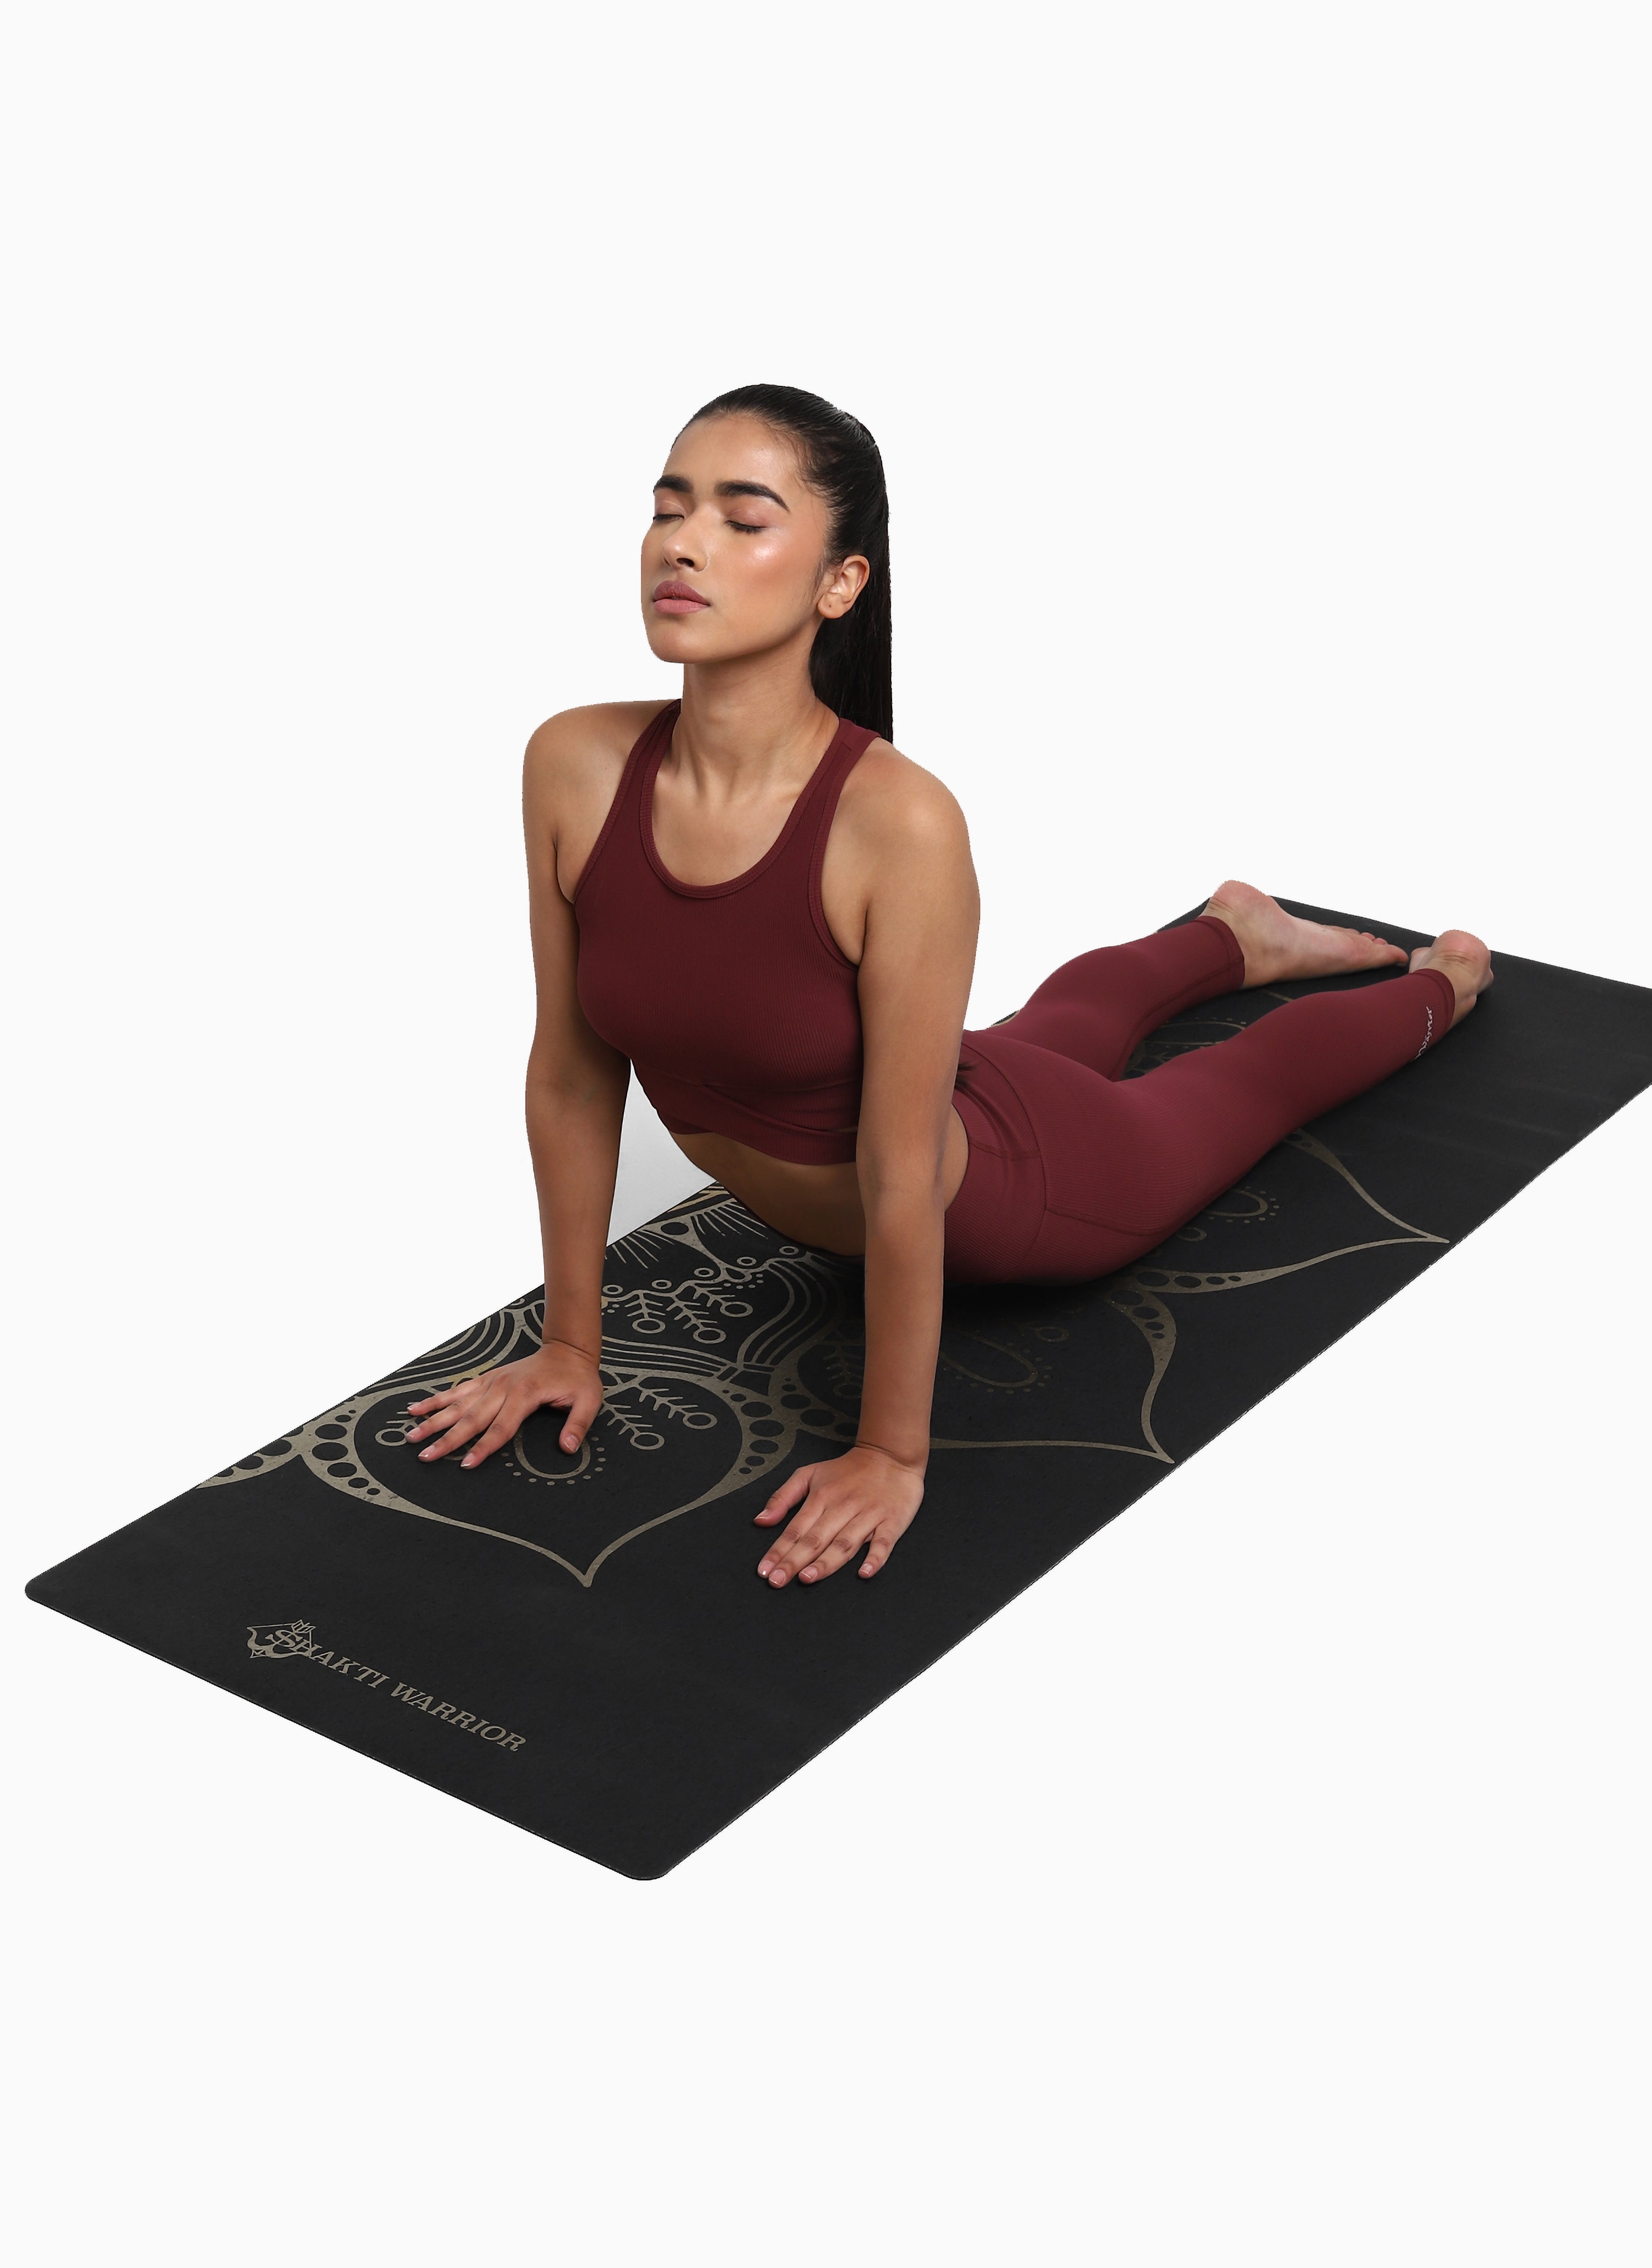 Shakti Warrior Black Lotus Recycled PU Yoga Mat - Enigmatic lotus design on black surface, wider dimension for enhanced stability. Eco-friendly, perfect for regular and hot yoga.